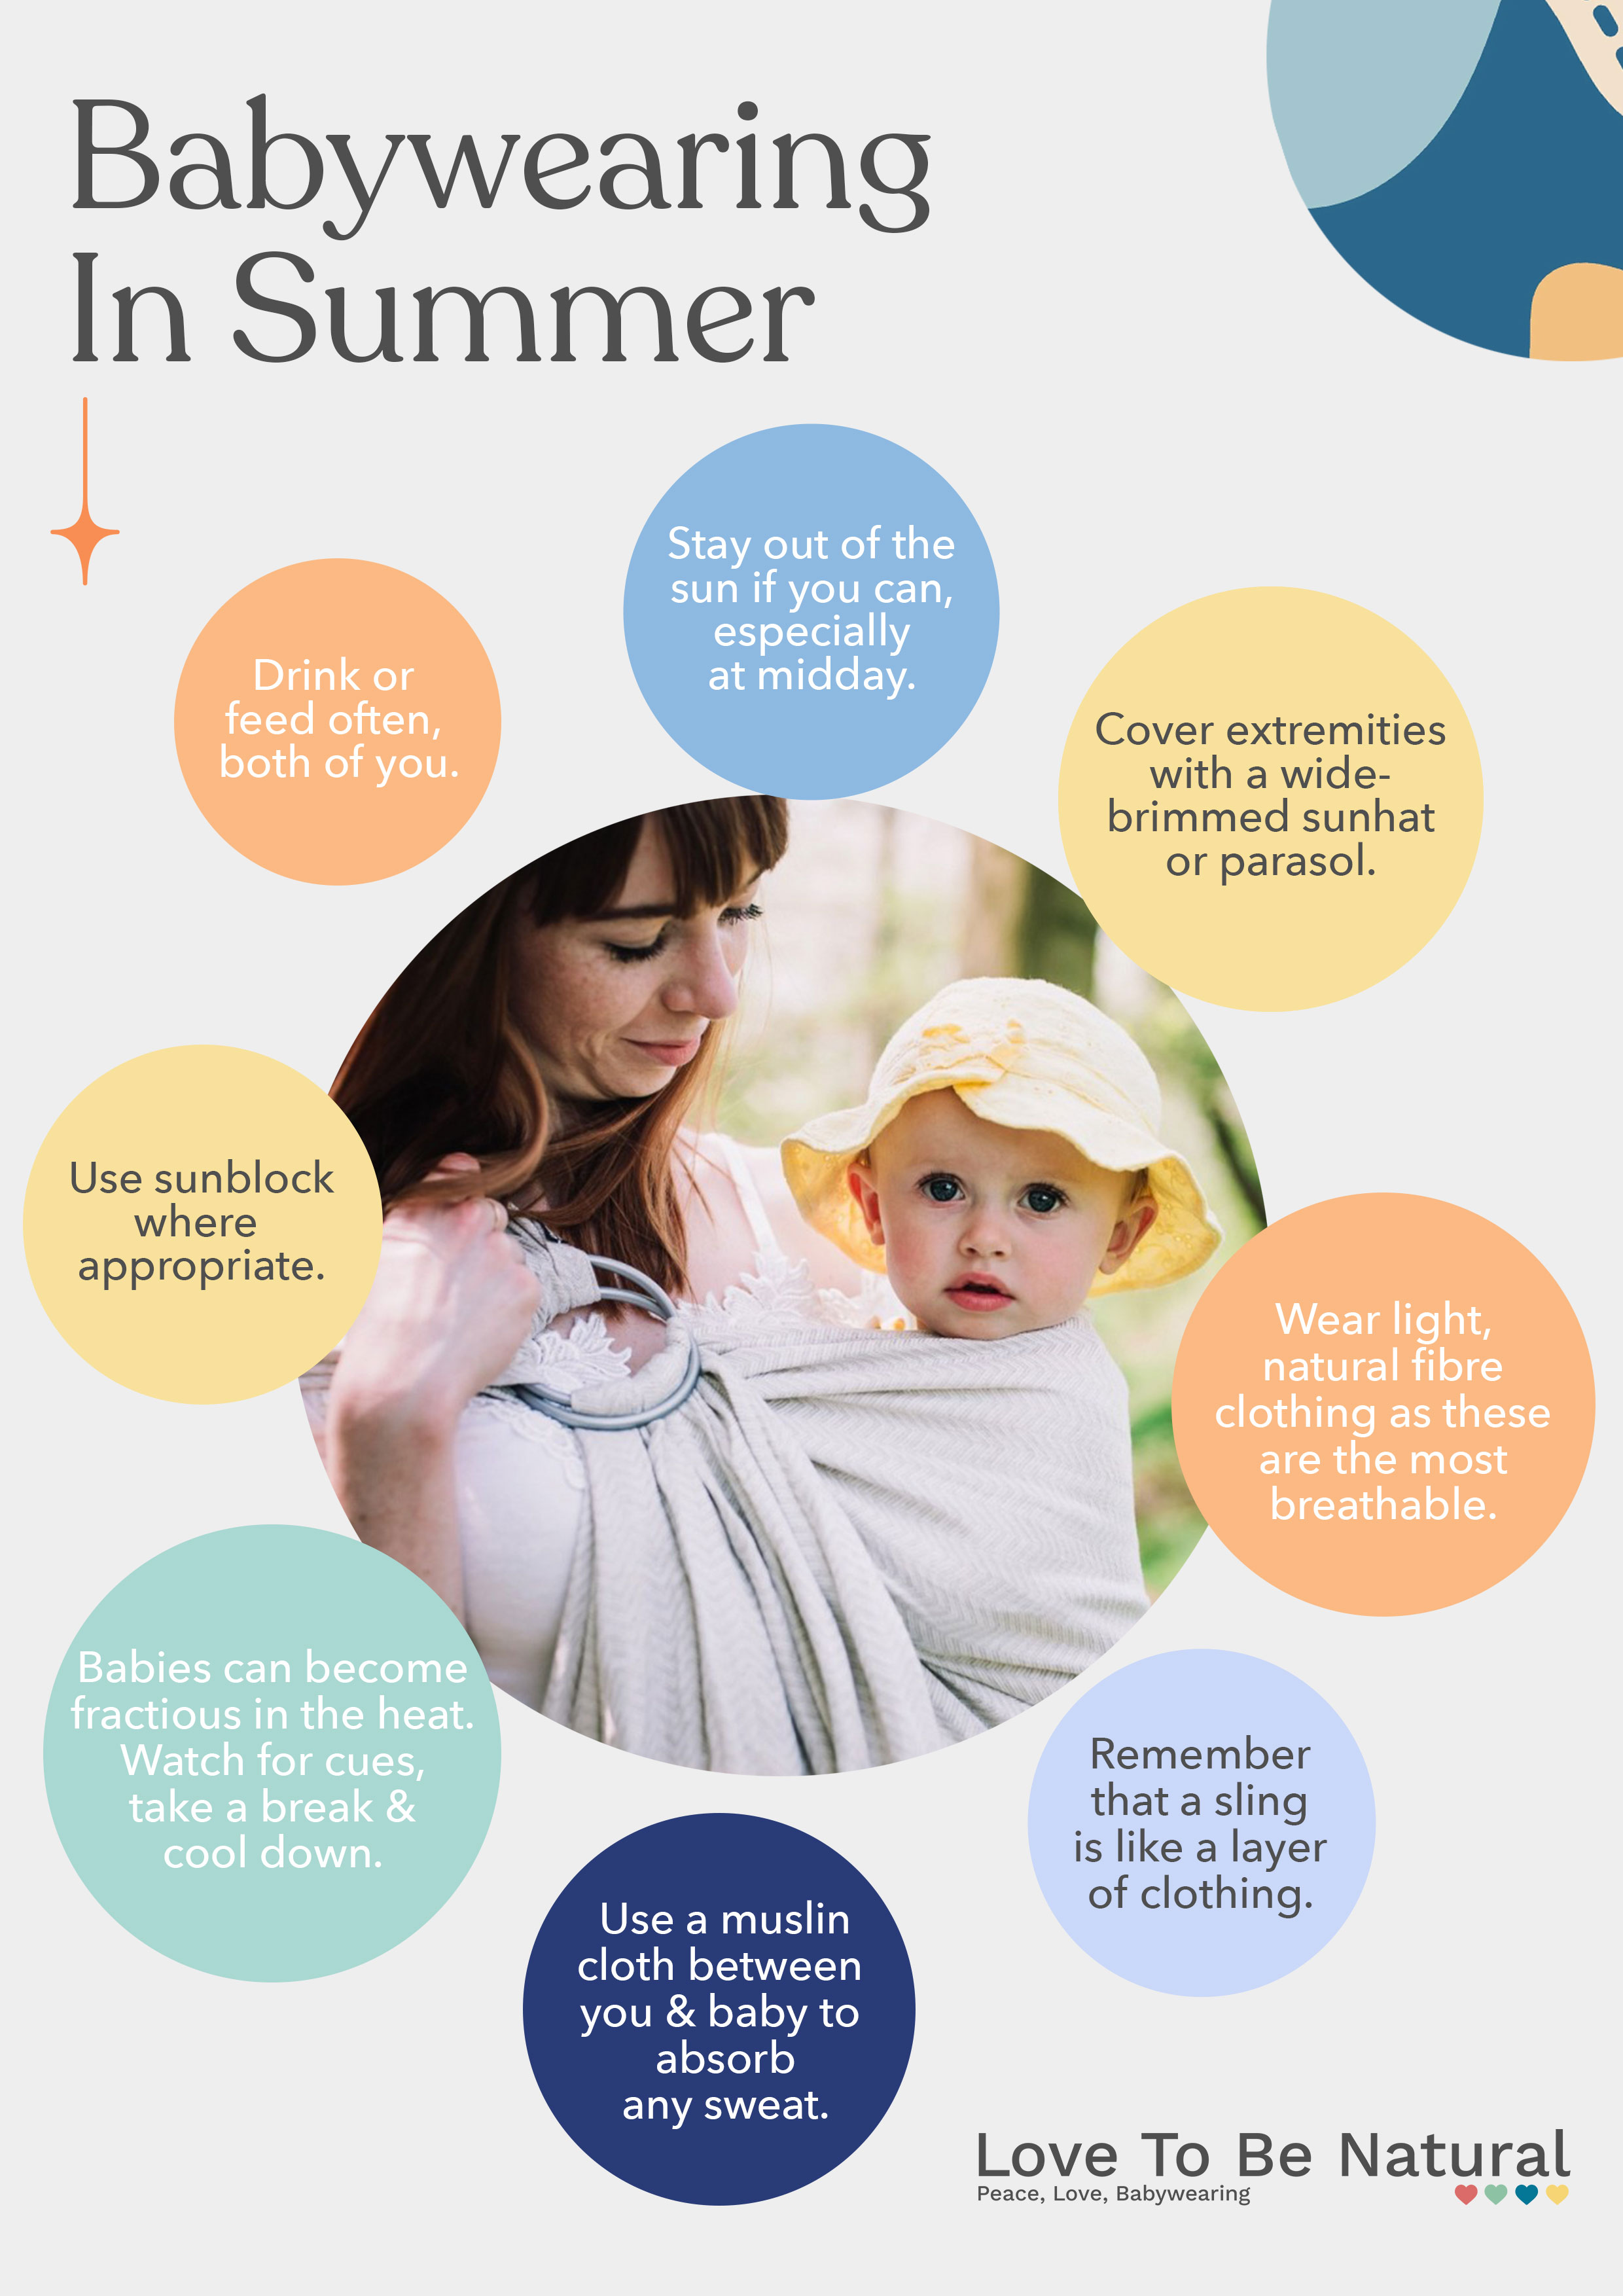 Babywearing In Summer & Warm Weather - 8 Top Tips For Staying Safe & Cool